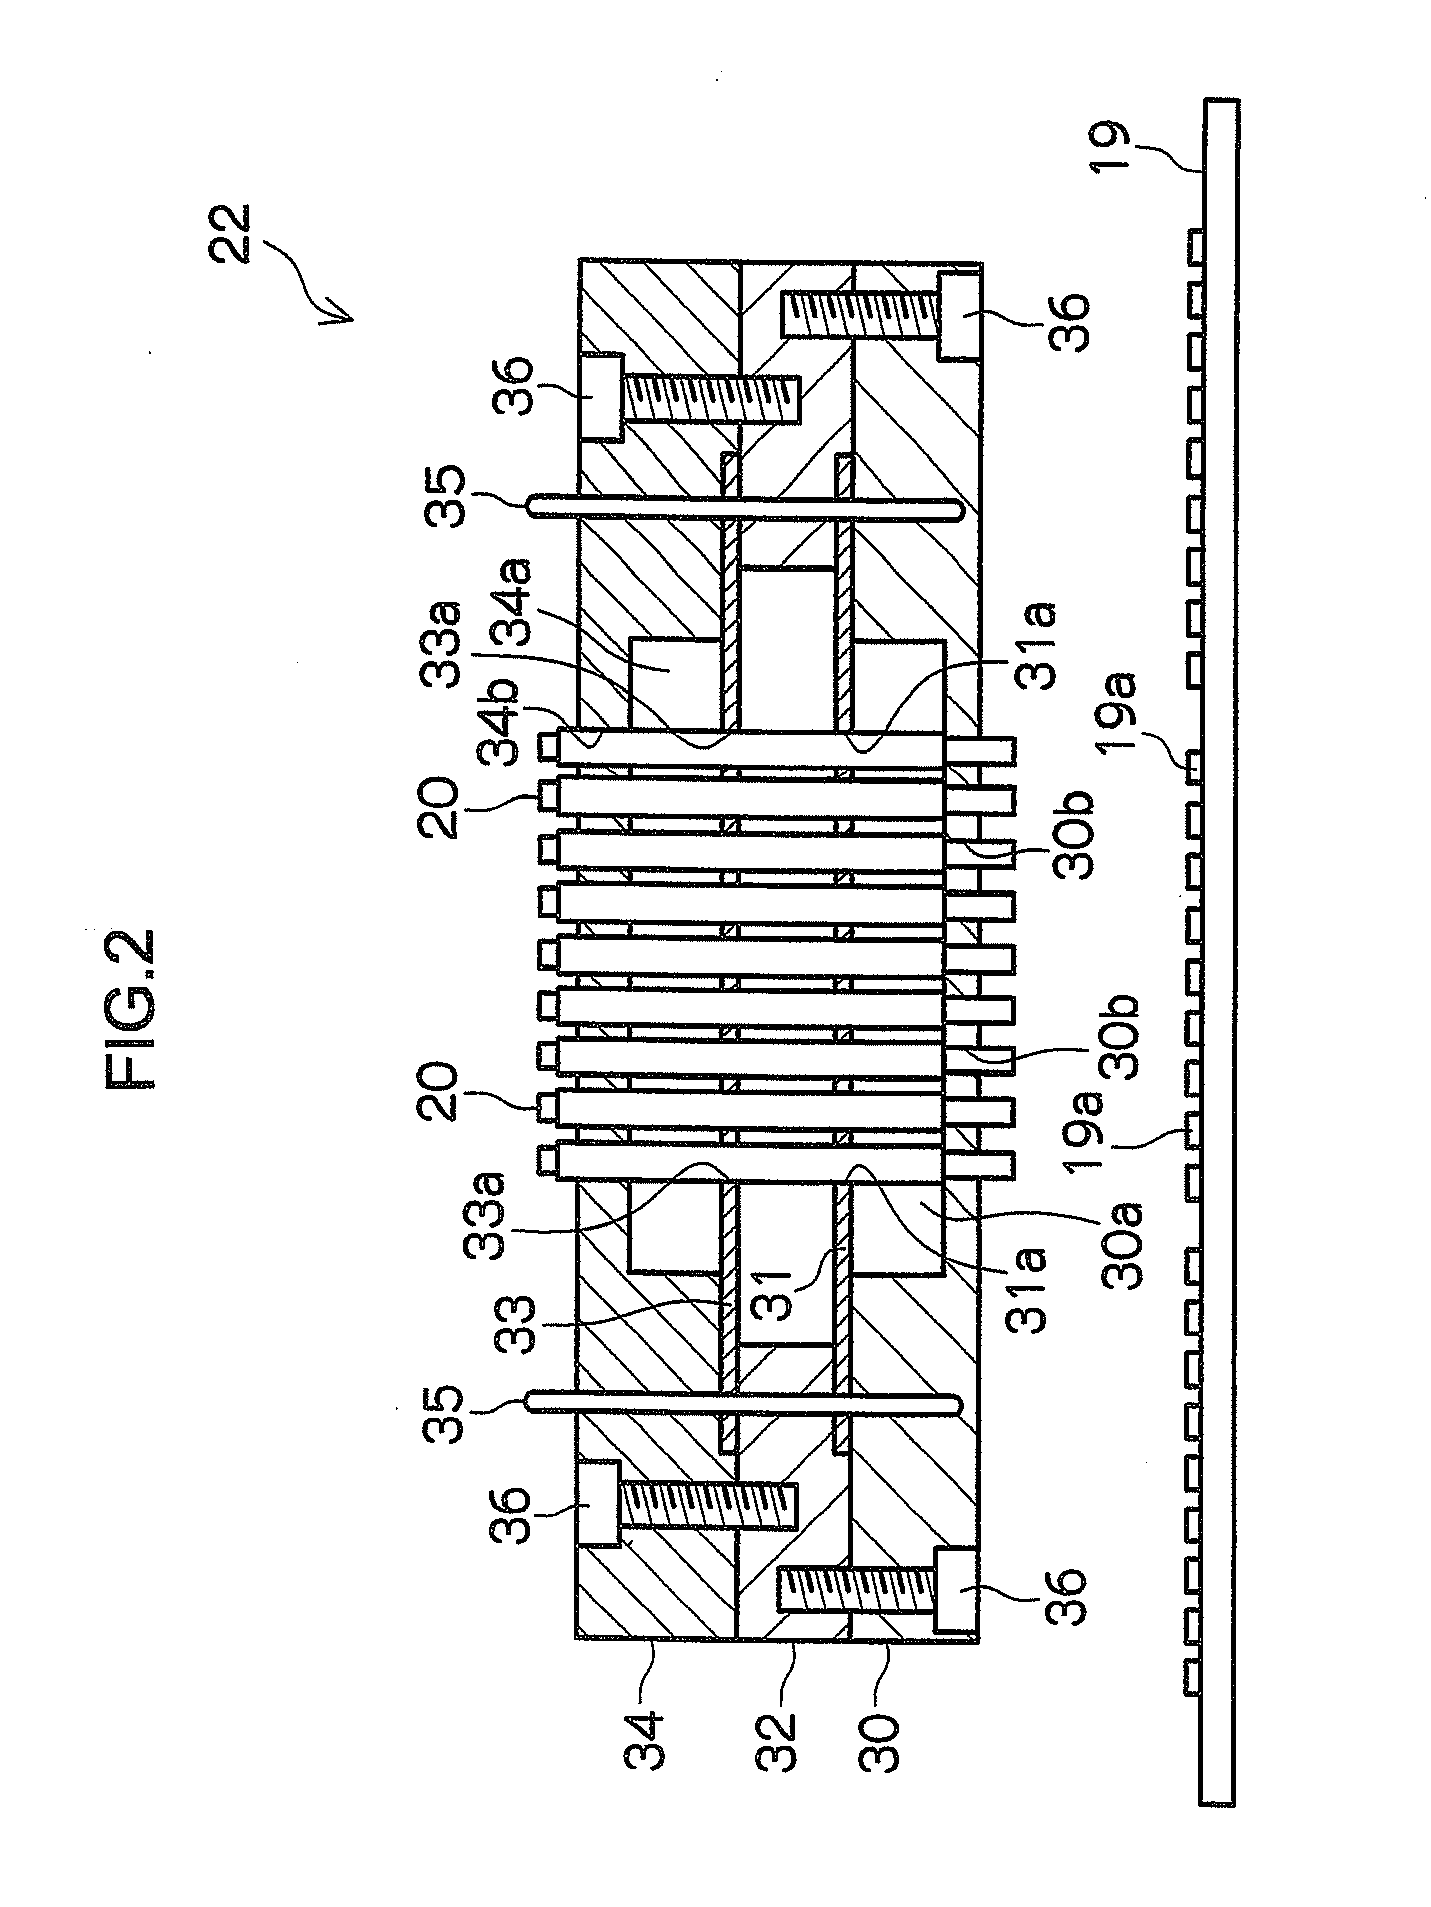 Electrical contactor and electrical connecting apparatus